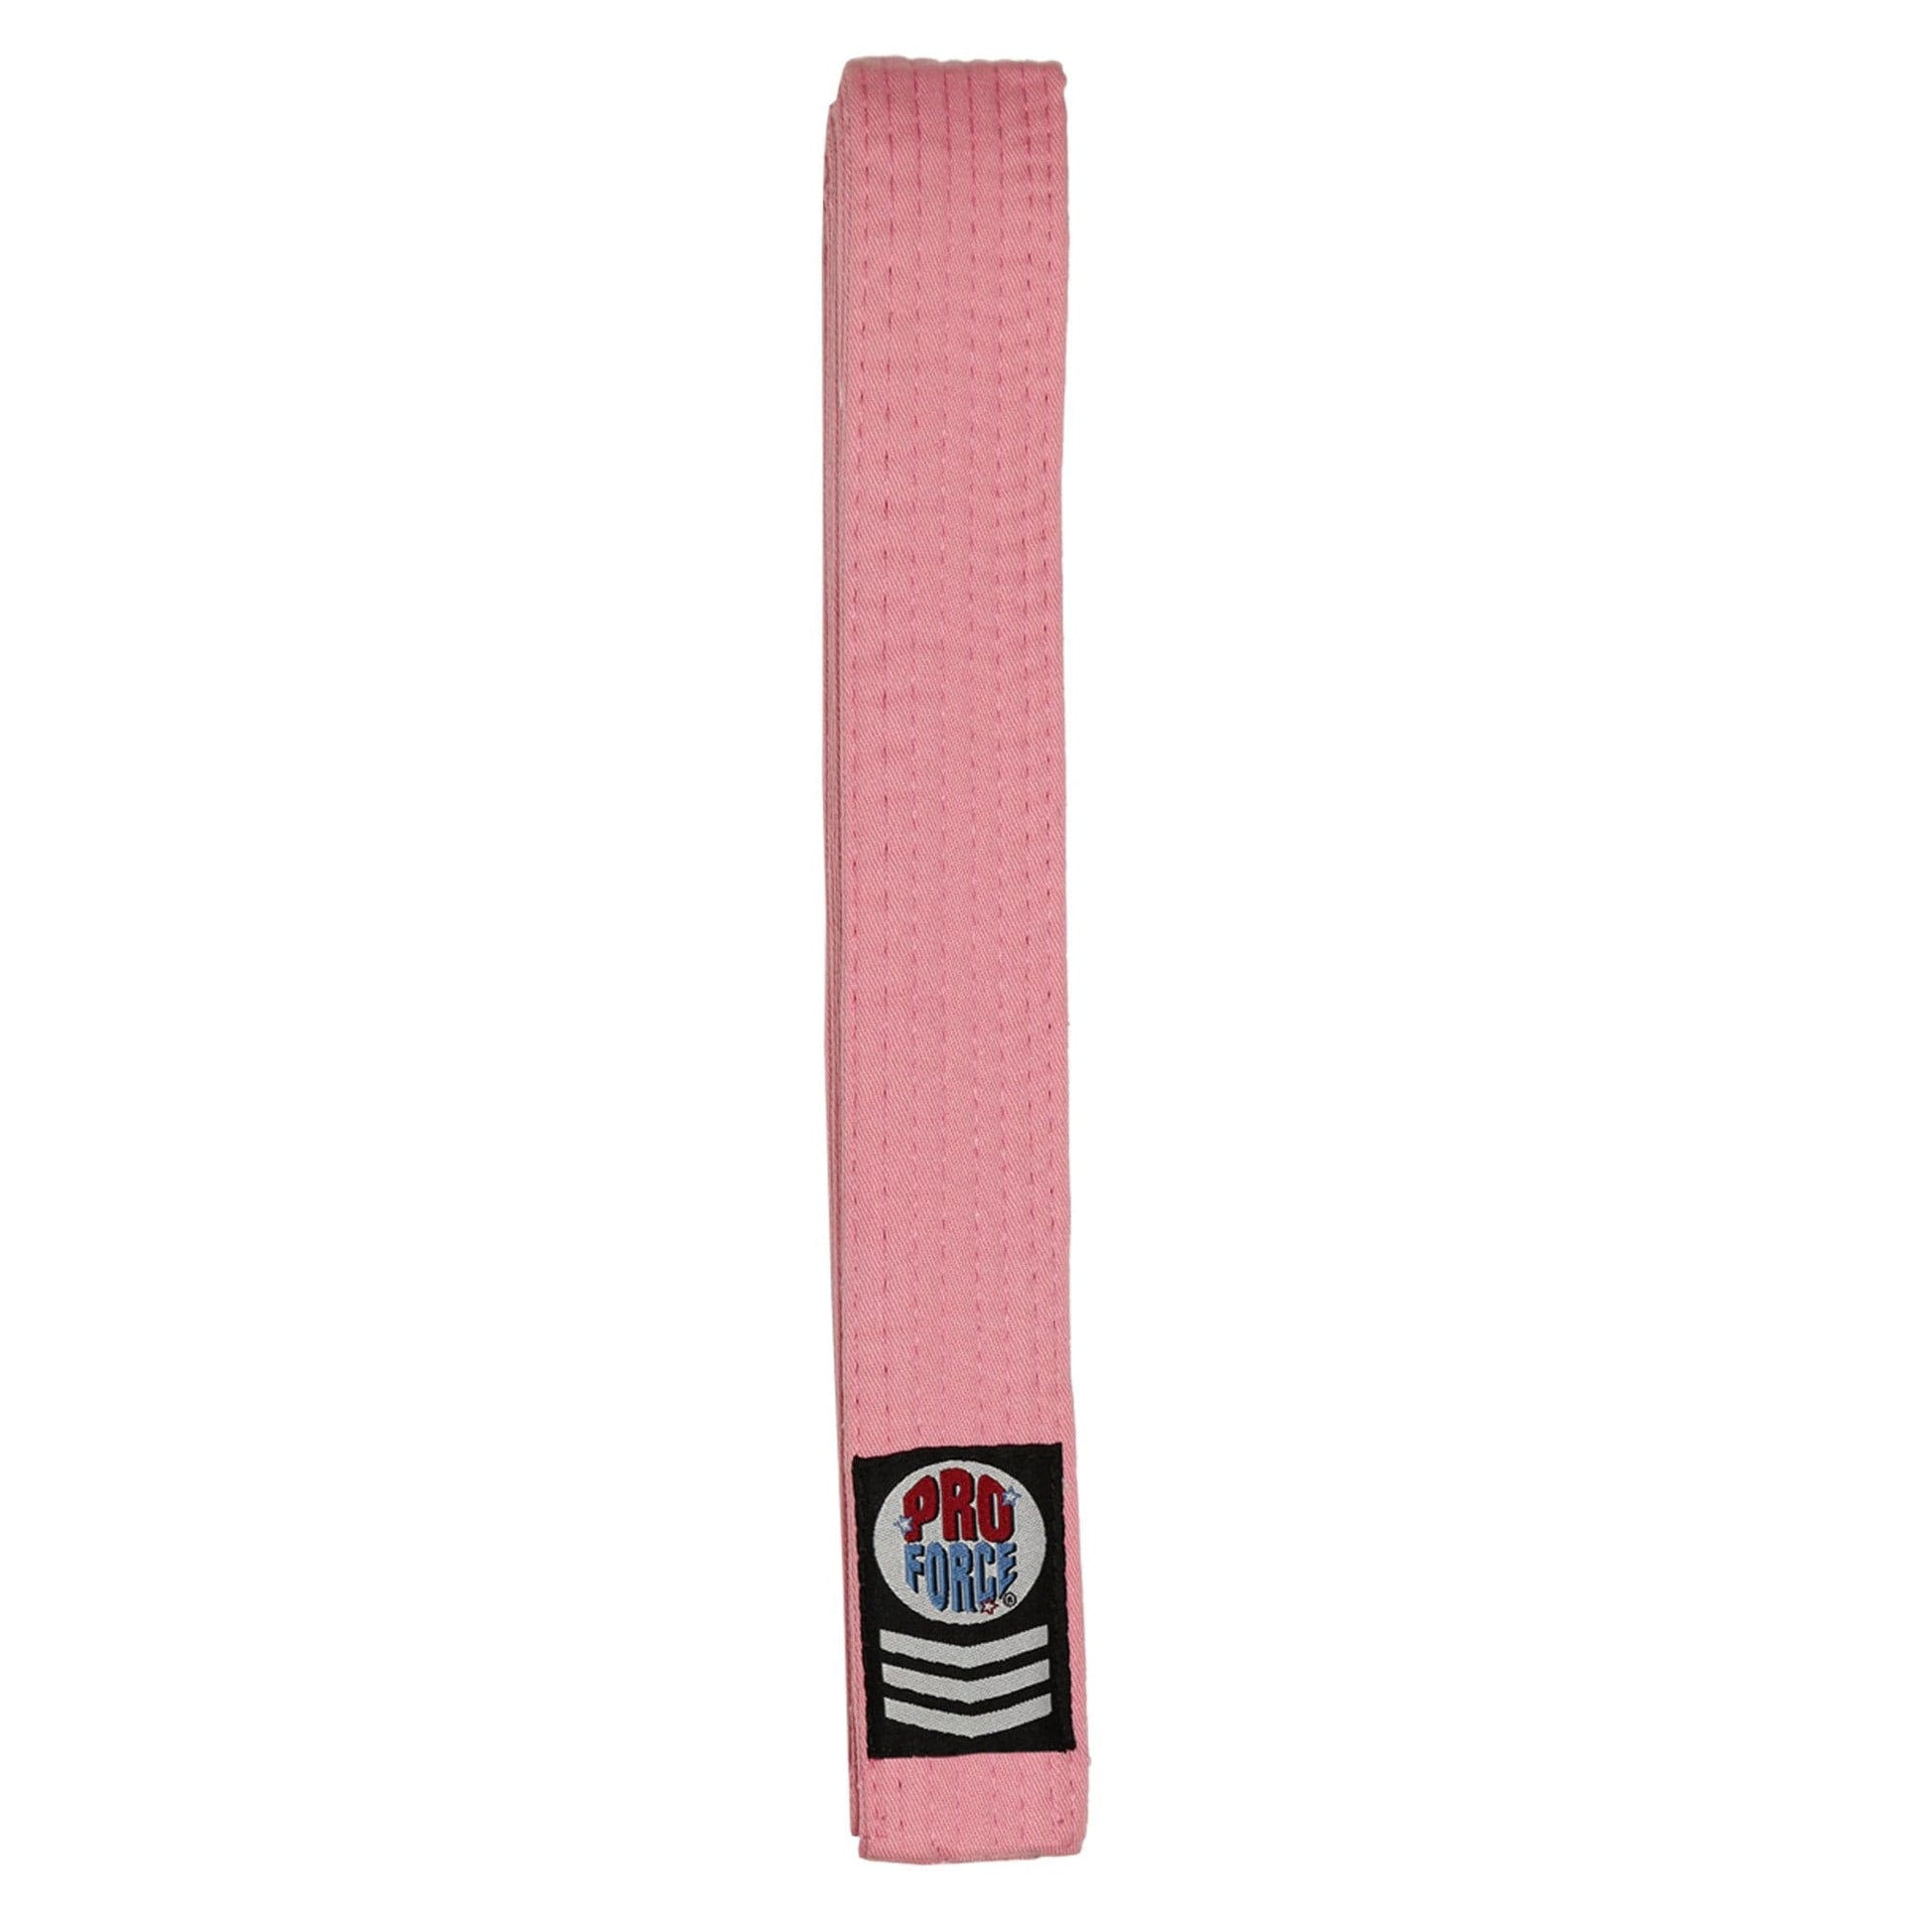 EclipseMartialArtsSupplies sporting goods Pink / 0 child small ProForce Gladiator 1.75 inch wide Double Wrap Karate Belts